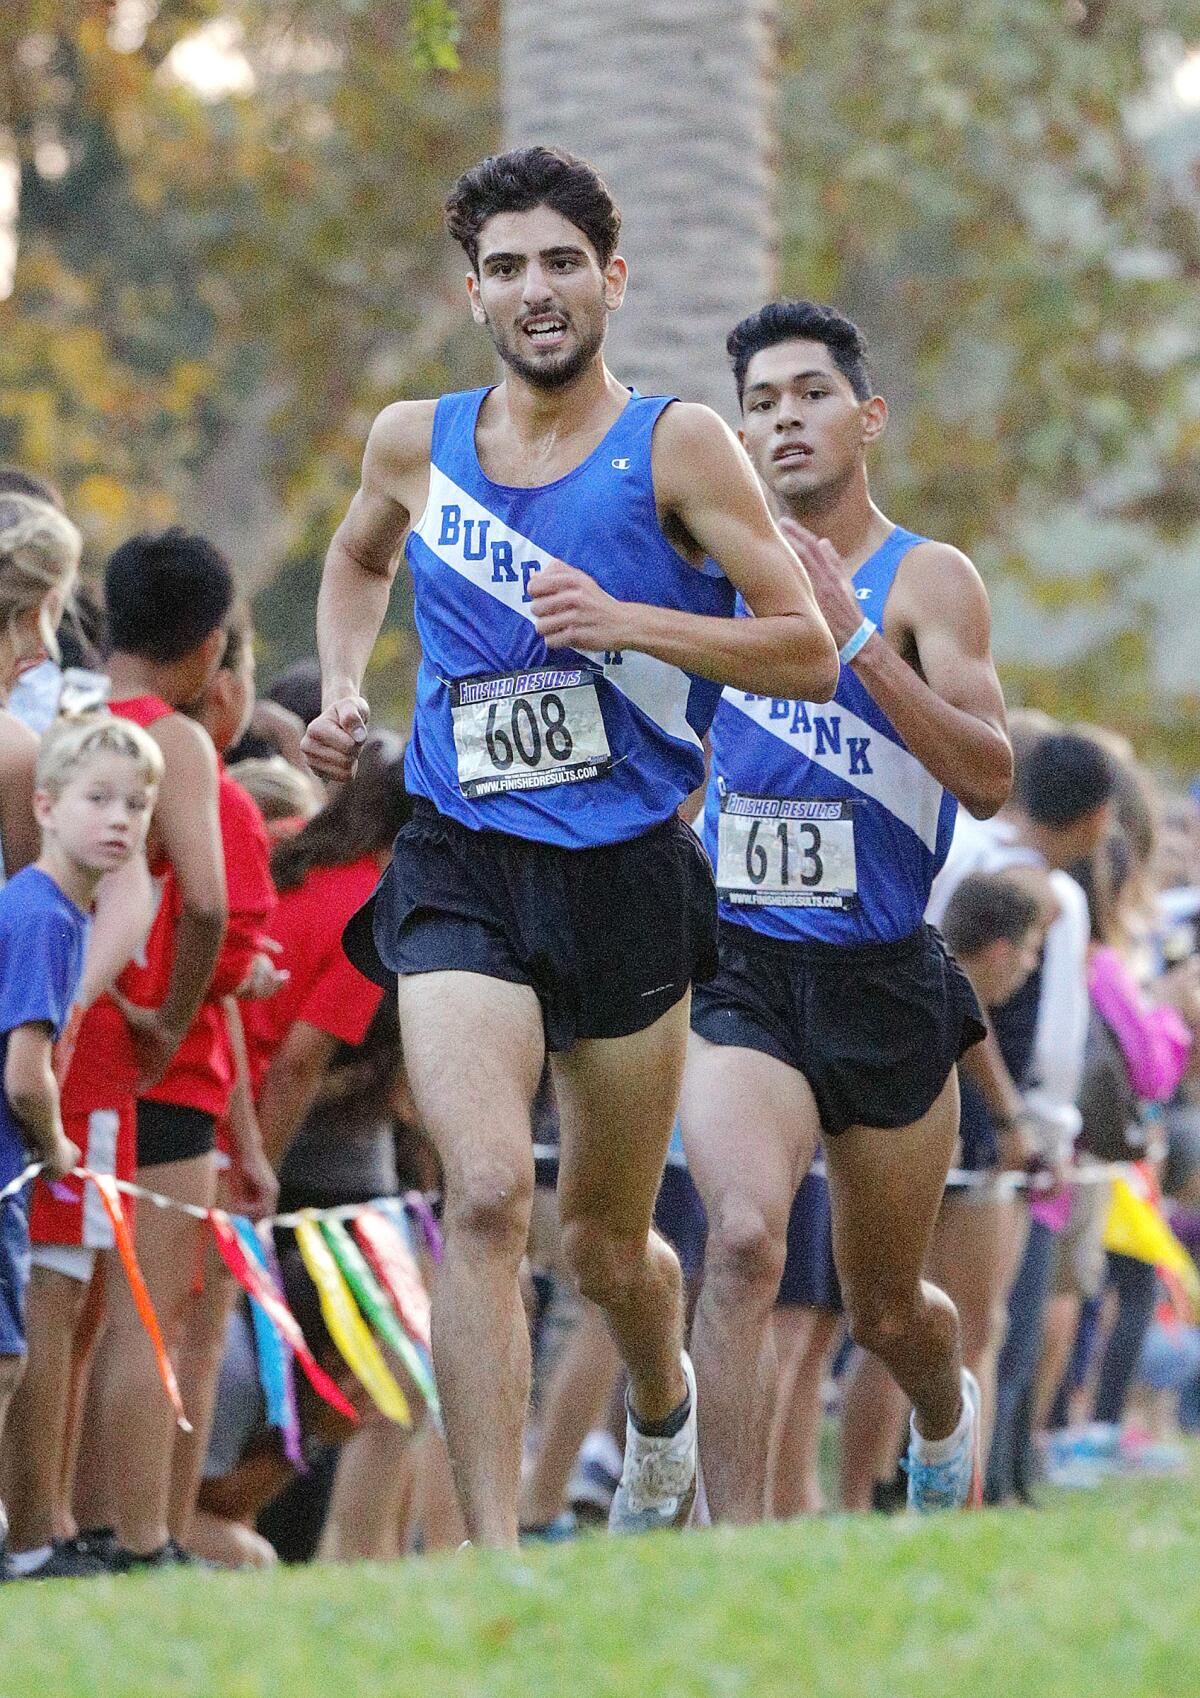 Burbank's Victor Goli comes to the finish in fifth place in a Pacific League cross country meet at Arcadia Park in Arcadia on Thursday, November 7, 2019. This is the final league meet of the season.